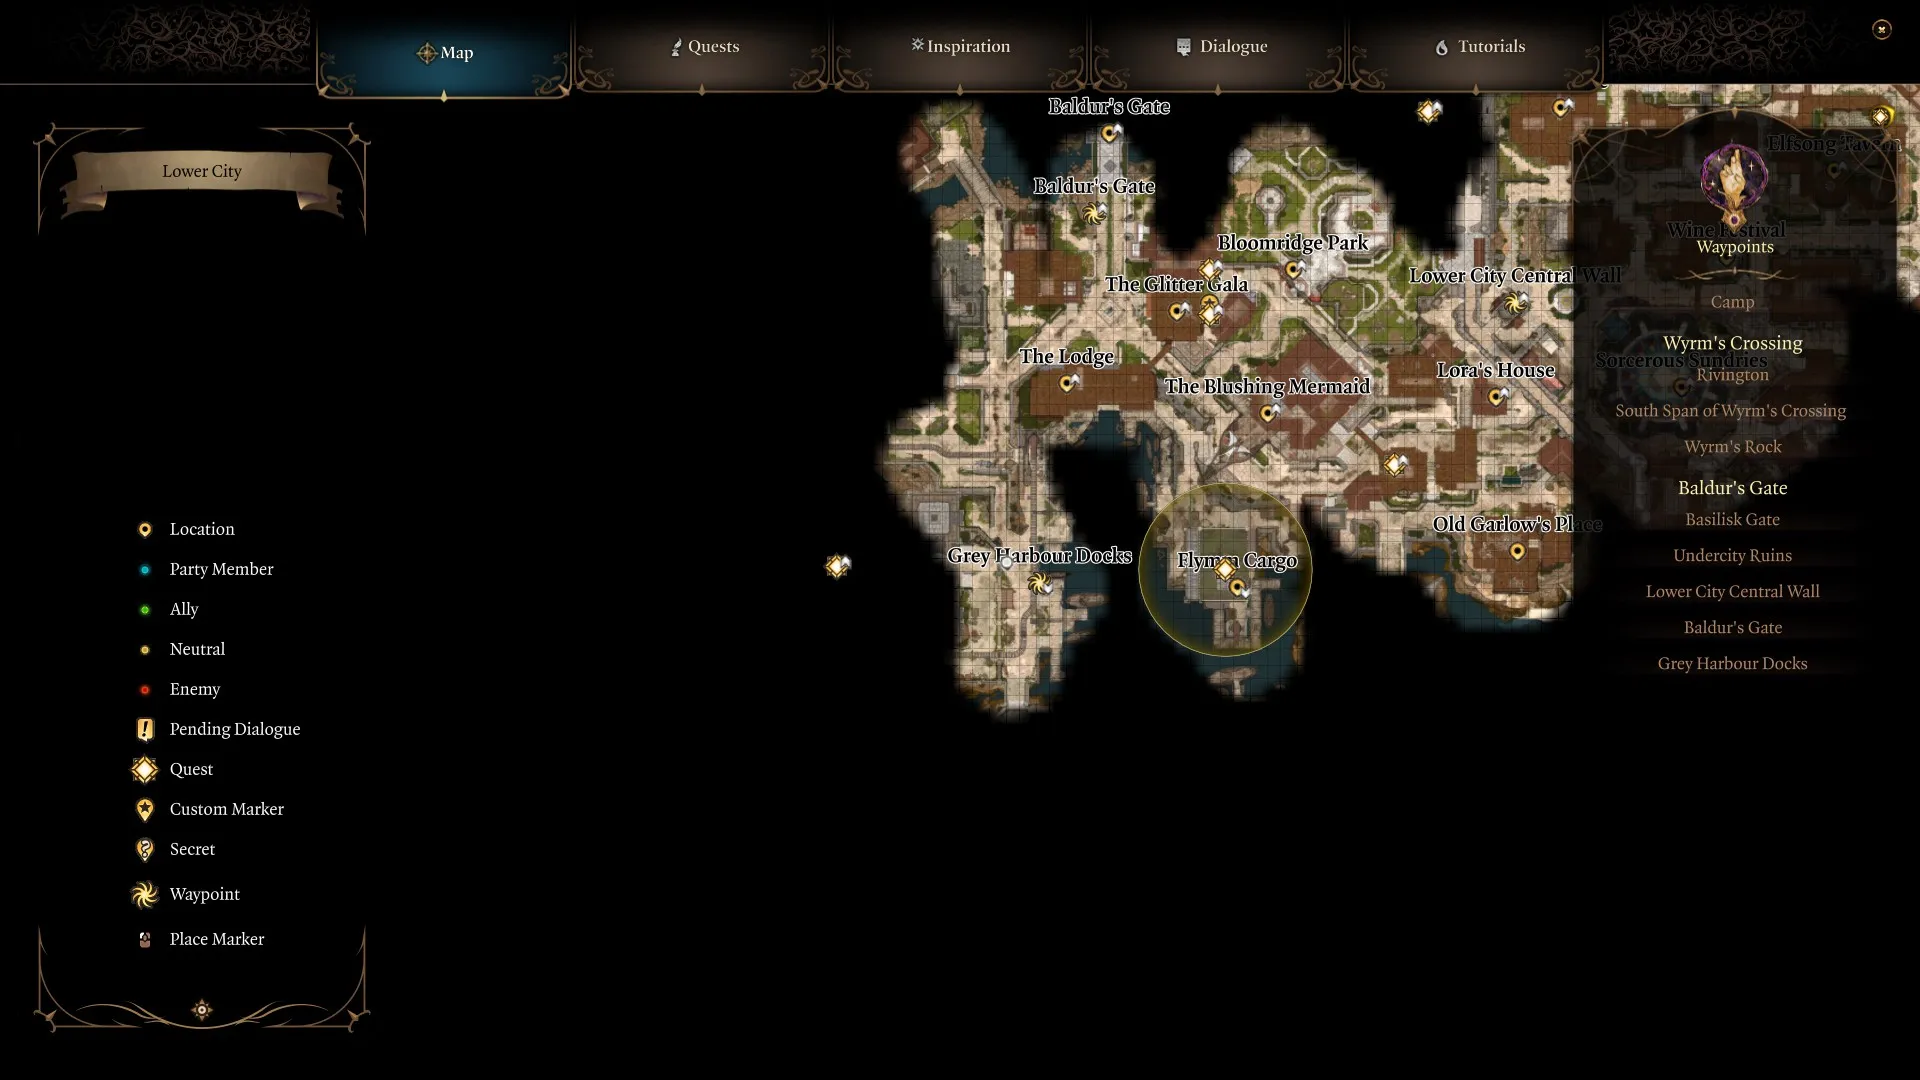 Screenshot of the map of Baldur’s Gate city, showing the location of the Steel Watch Foundry